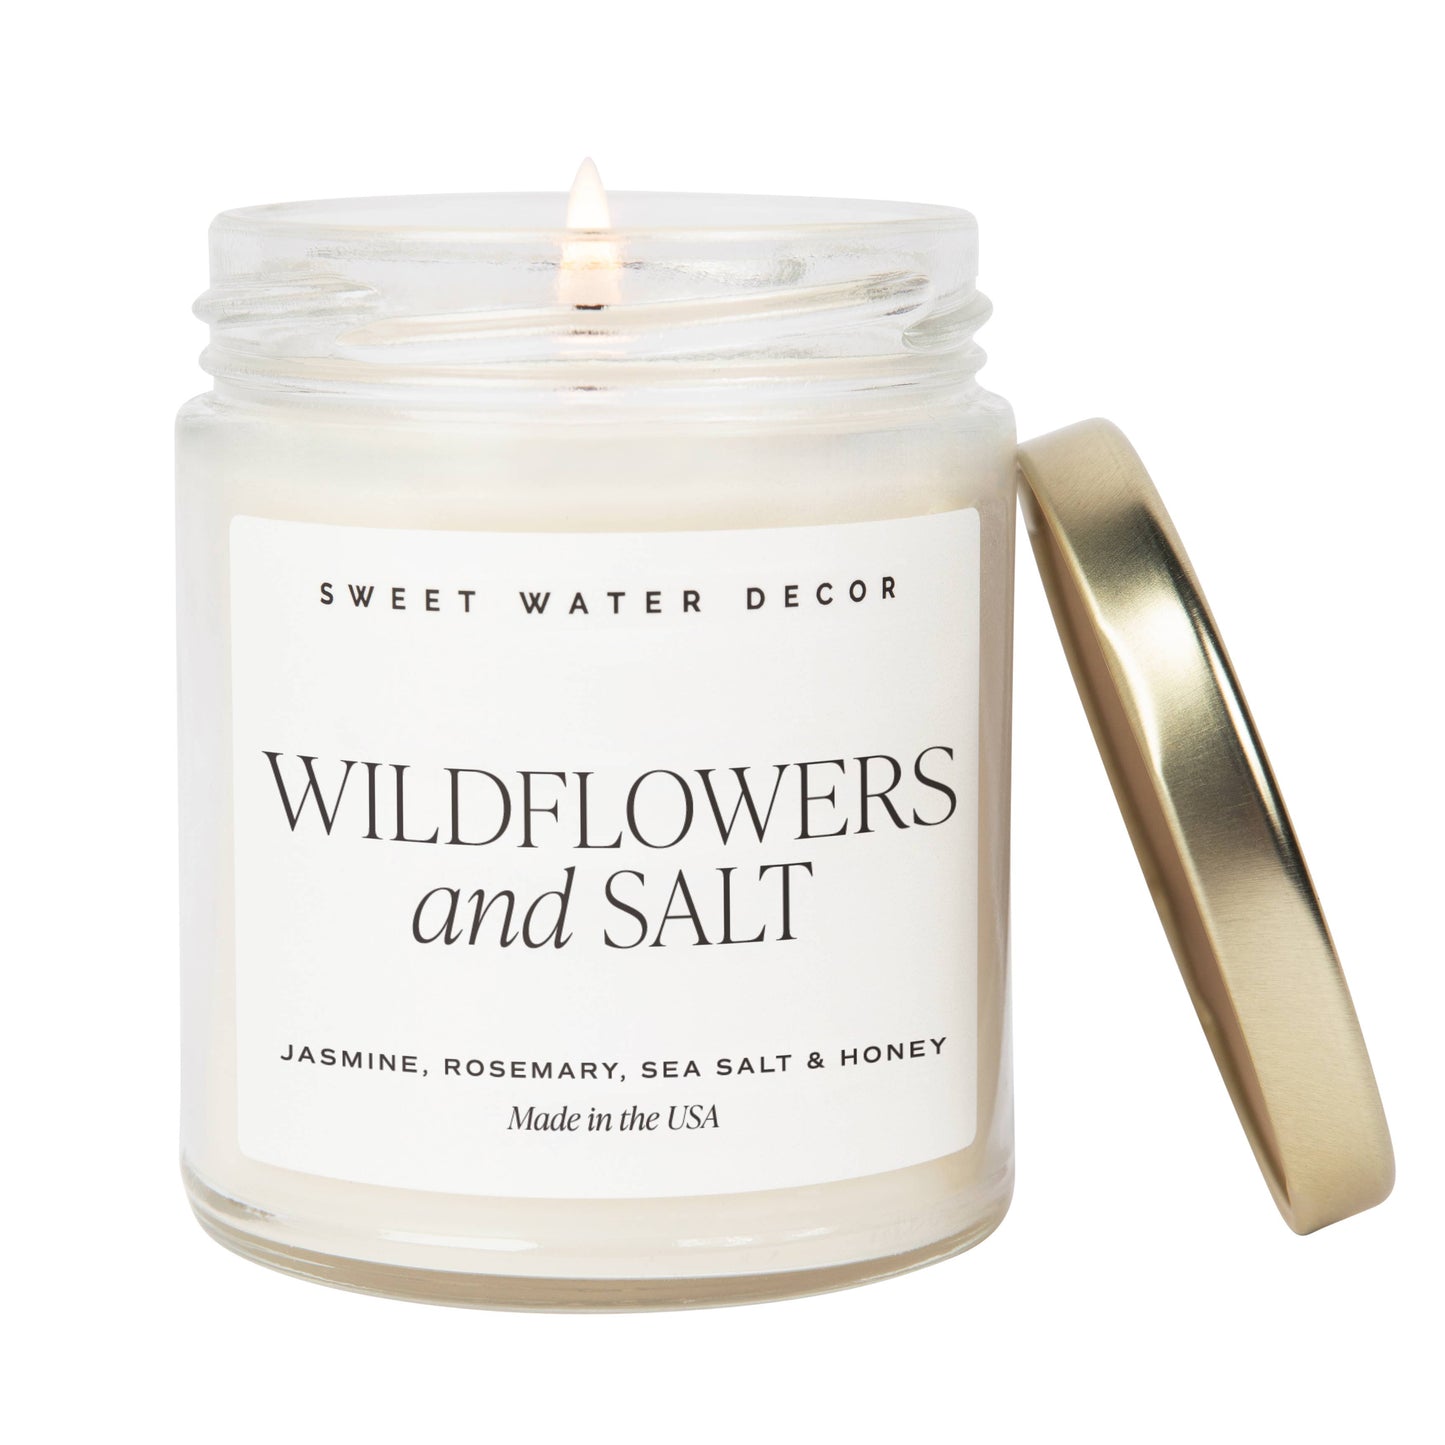 Wildflowers and Salt 9 oz Soy Candle - Home Decor & Gifts